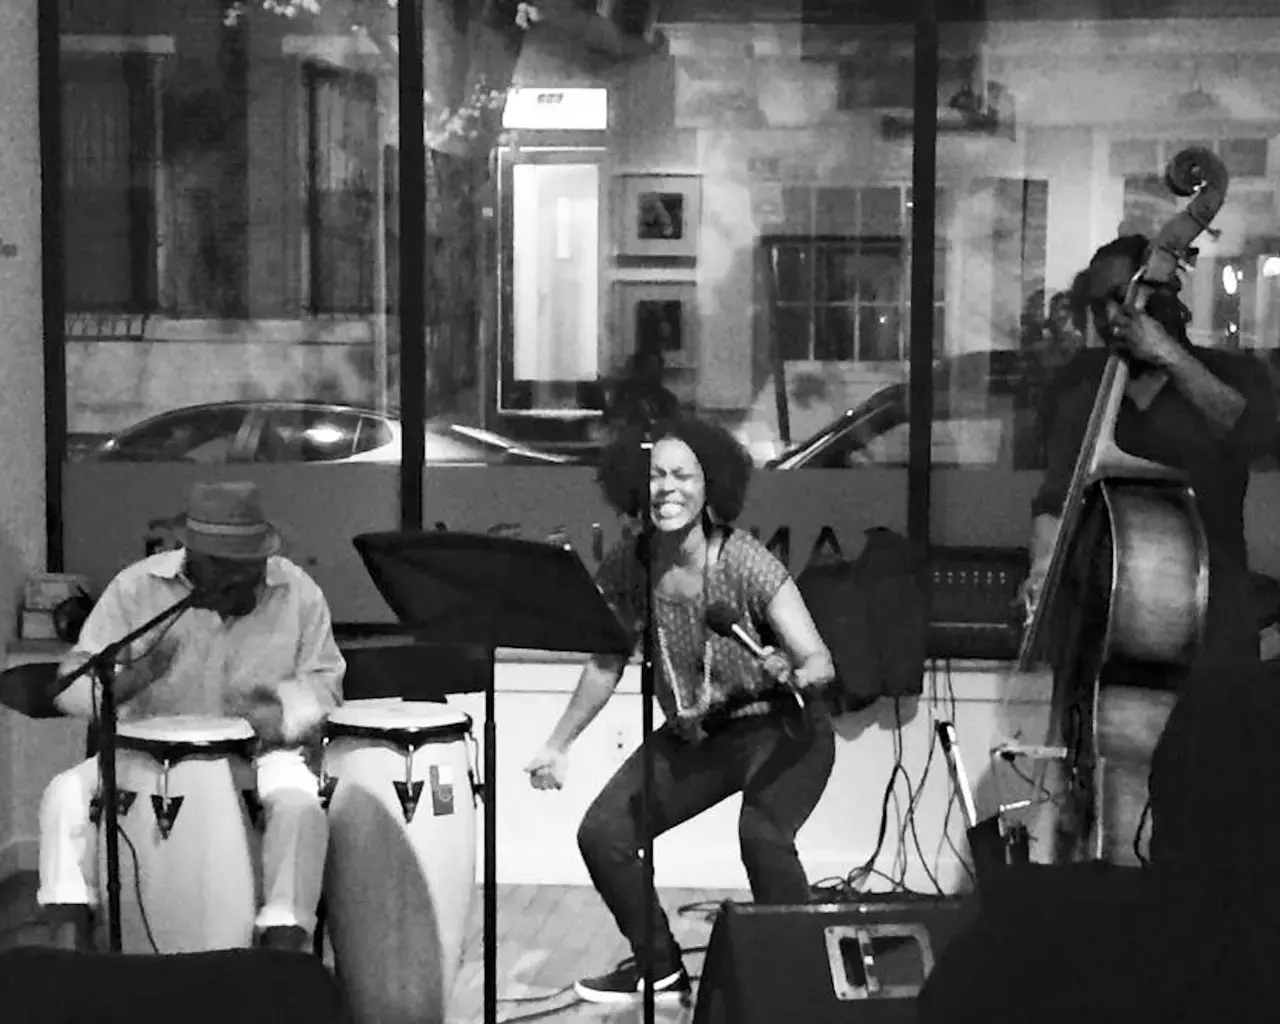 Yolanda Wisher in performance at Sanctuary Live with Karen L. Smith on percussion and Mark Palacio on bass, 2015. Photo by V. Shayne Frederick.